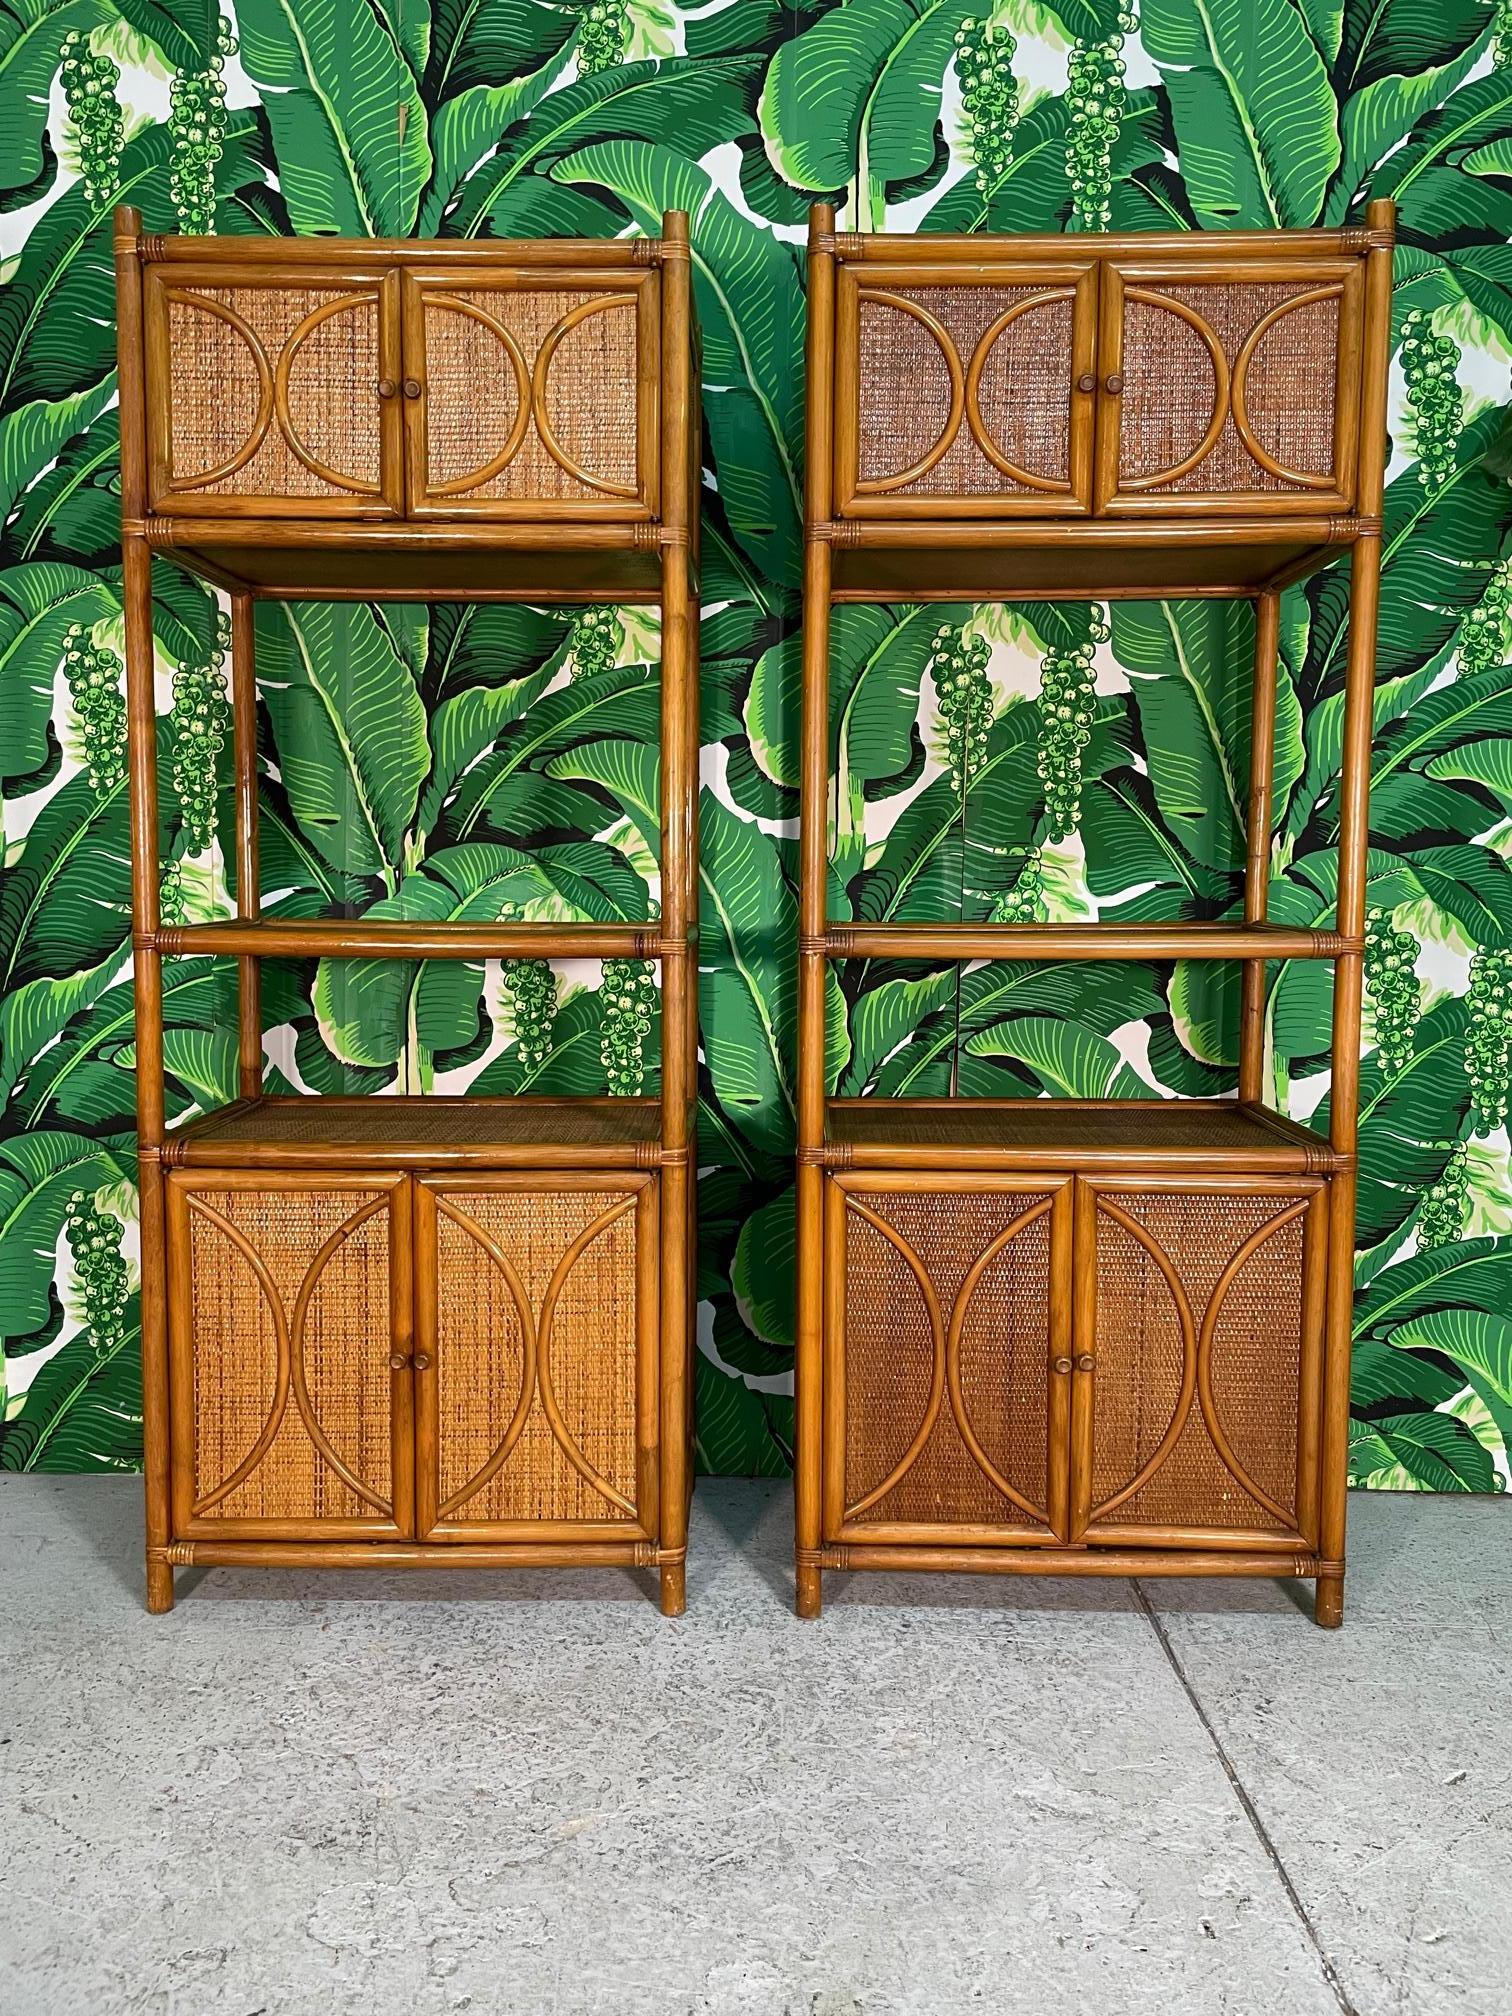 Pair of vintage rattan etageres feature woven wicker veneers and both upper and lower double door cabinets. Warm, rich finish and solid construction. Very good condition with minor imperfections consistent with age.

     